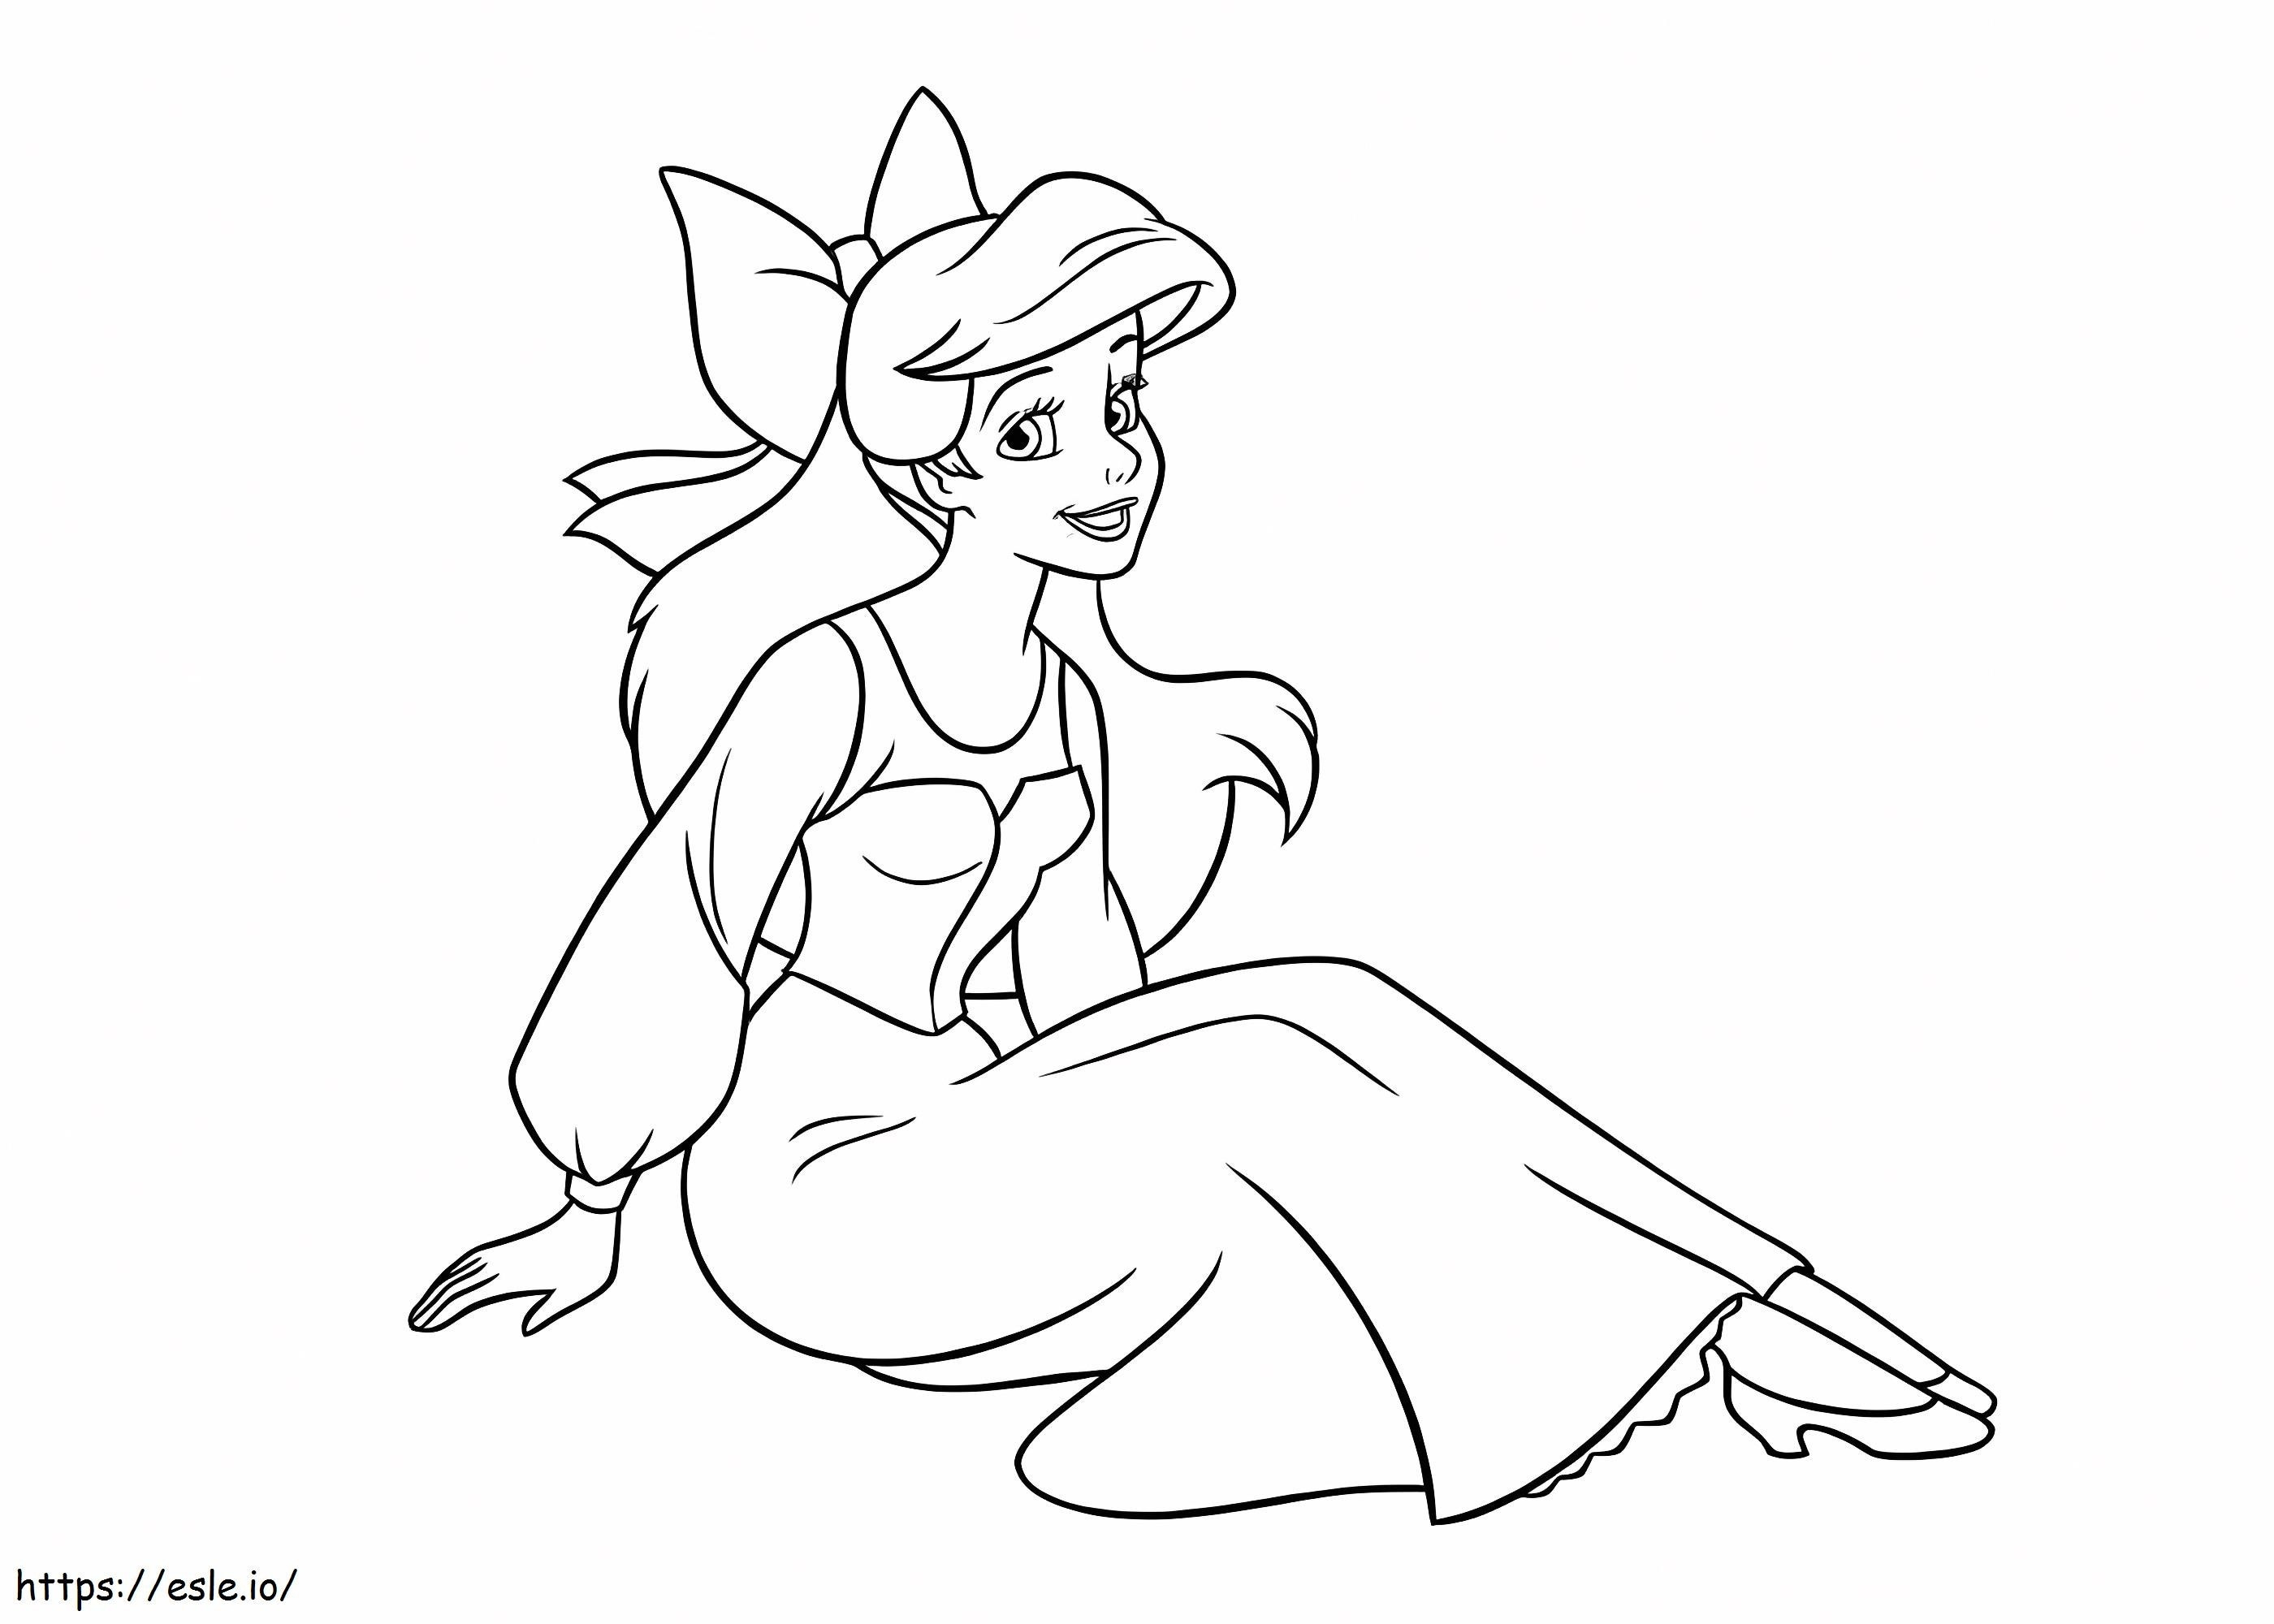 Funny Ariel Sitting coloring page